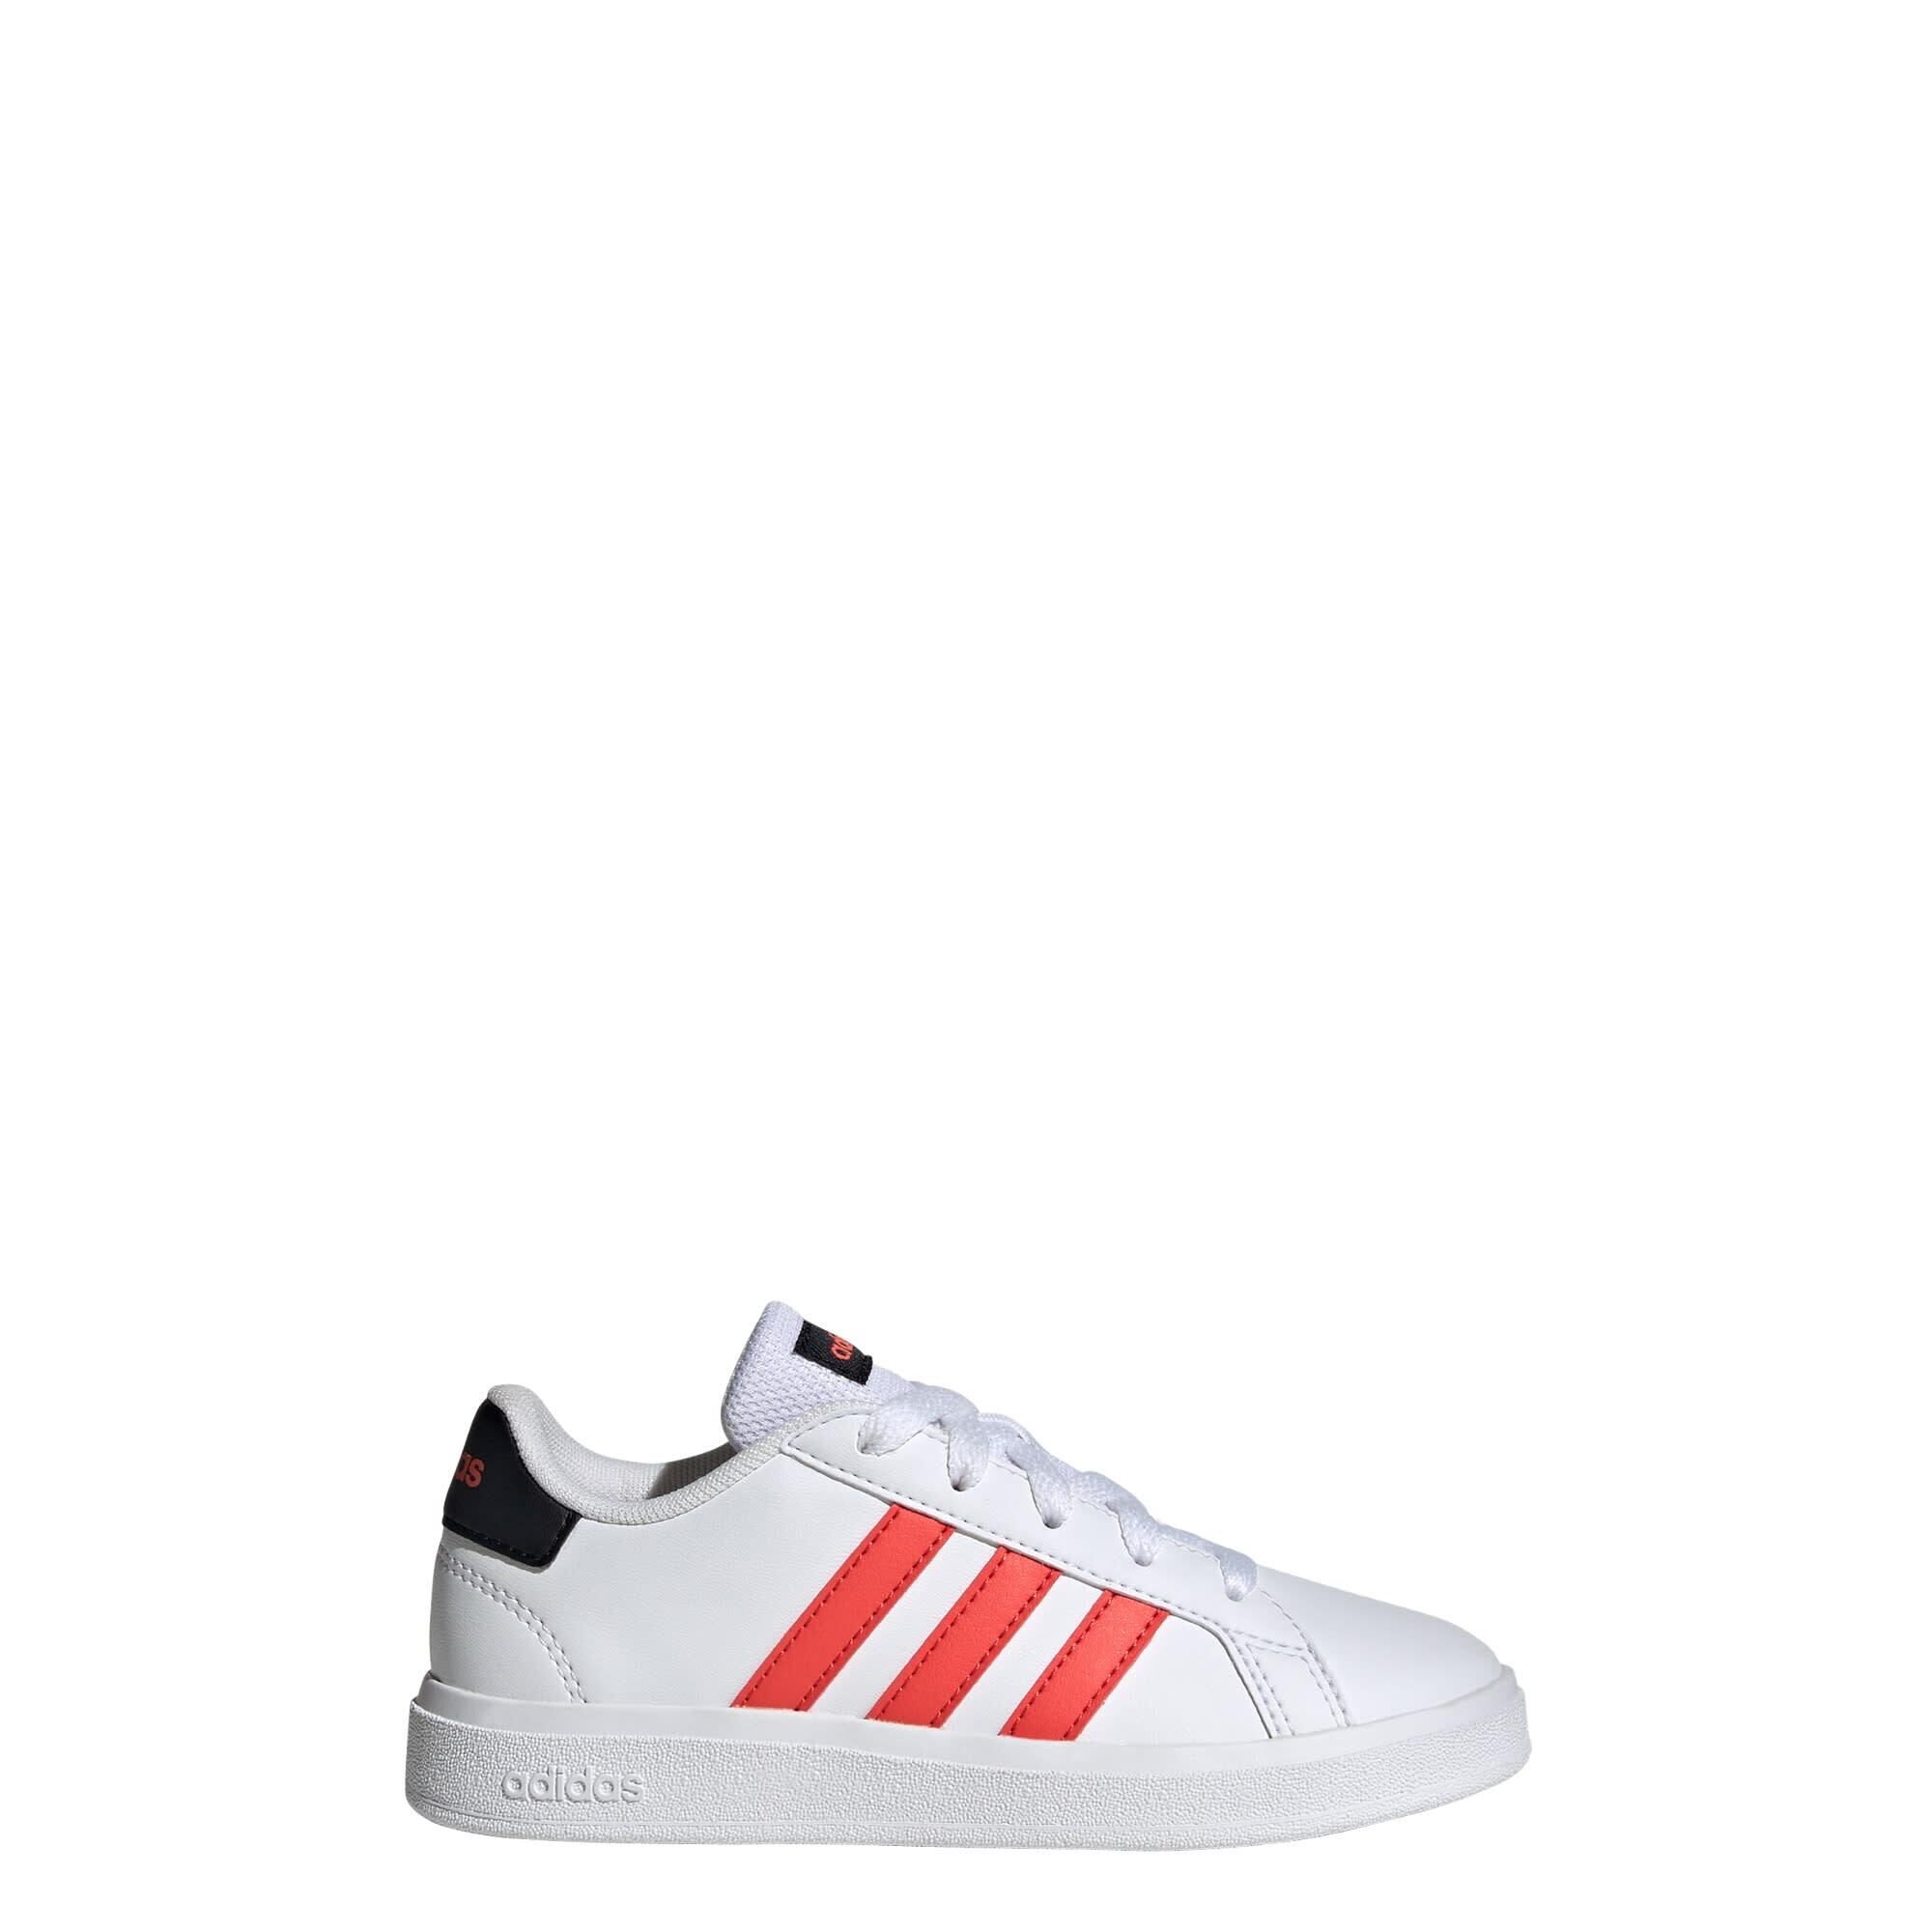 ADIDAS Grand Court Lifestyle Tennis Lace-Up Shoes